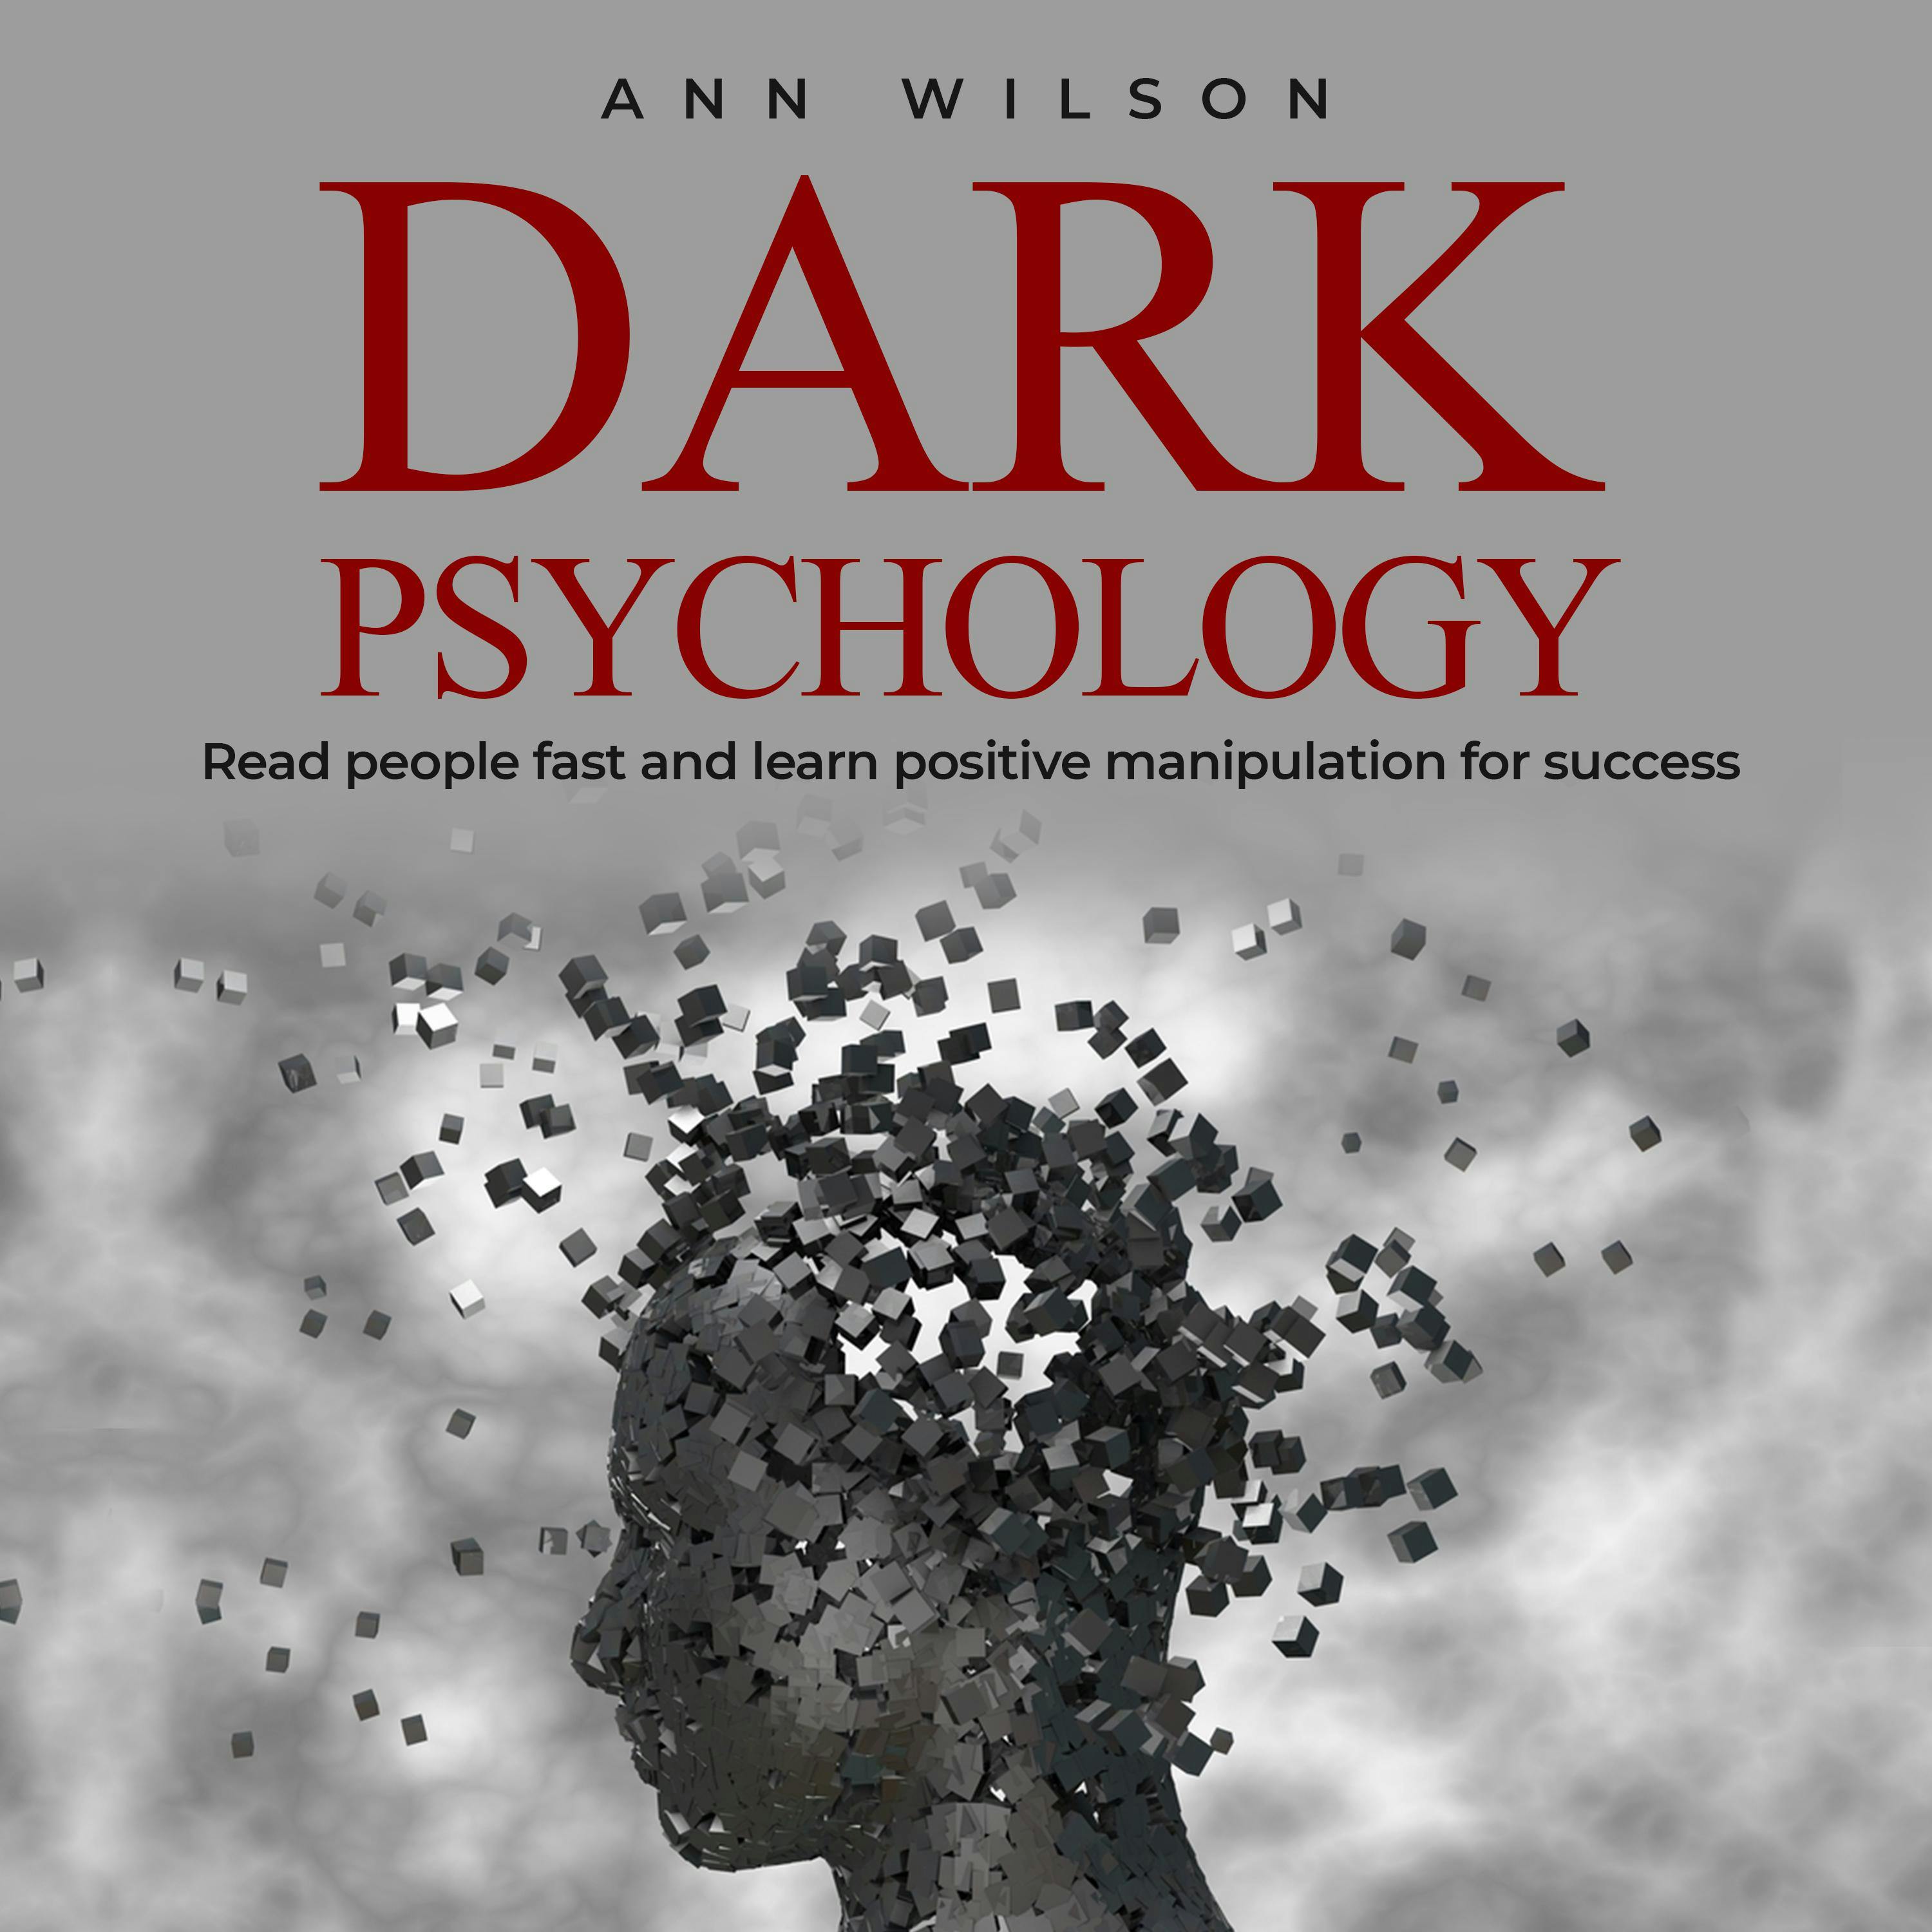 Dark Psychology: Read People Fast and Learn Positive Manipulation for Success - Ann Wilson